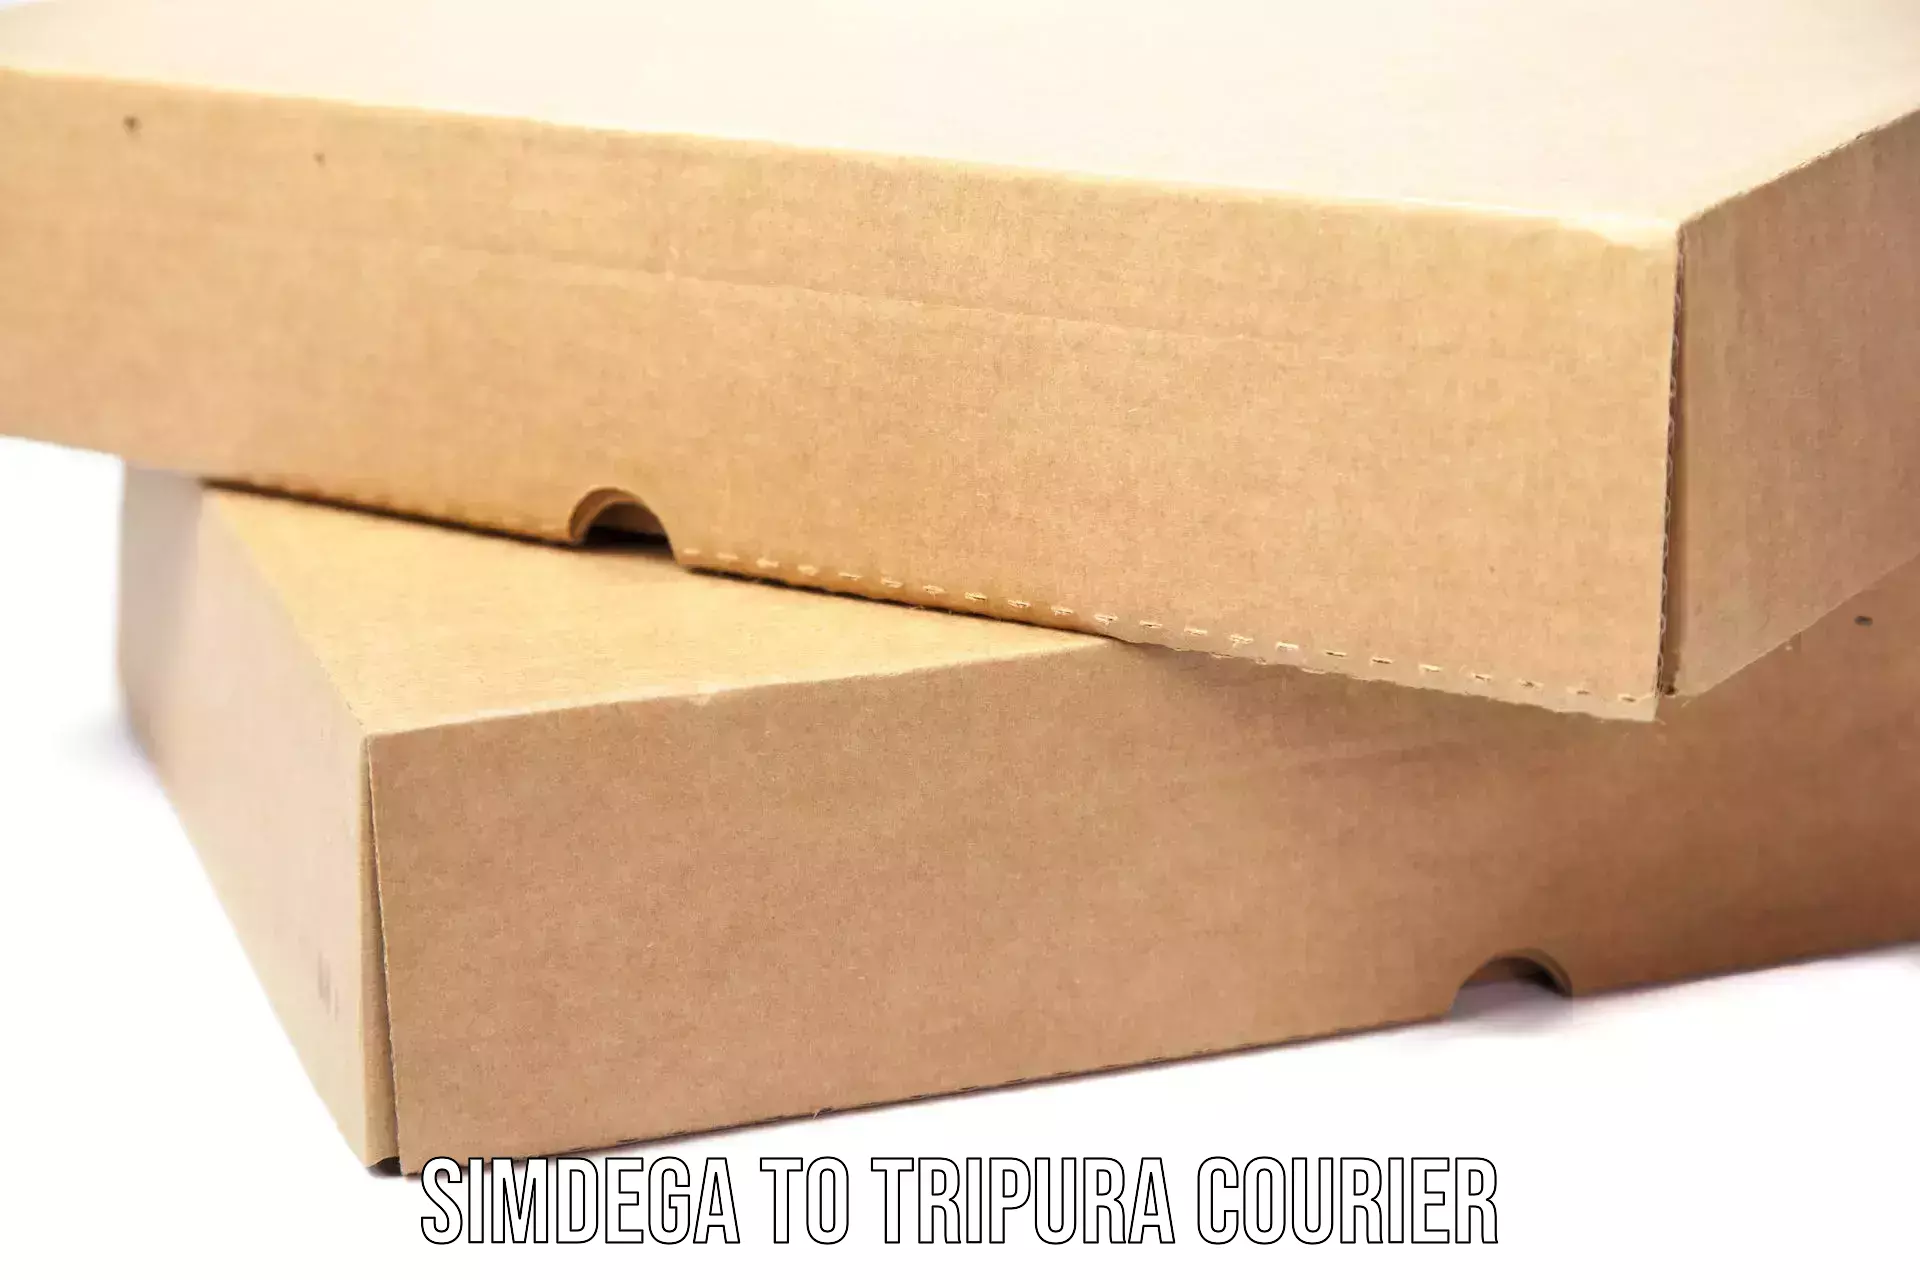 Cost-effective courier options Simdega to Udaipur Tripura